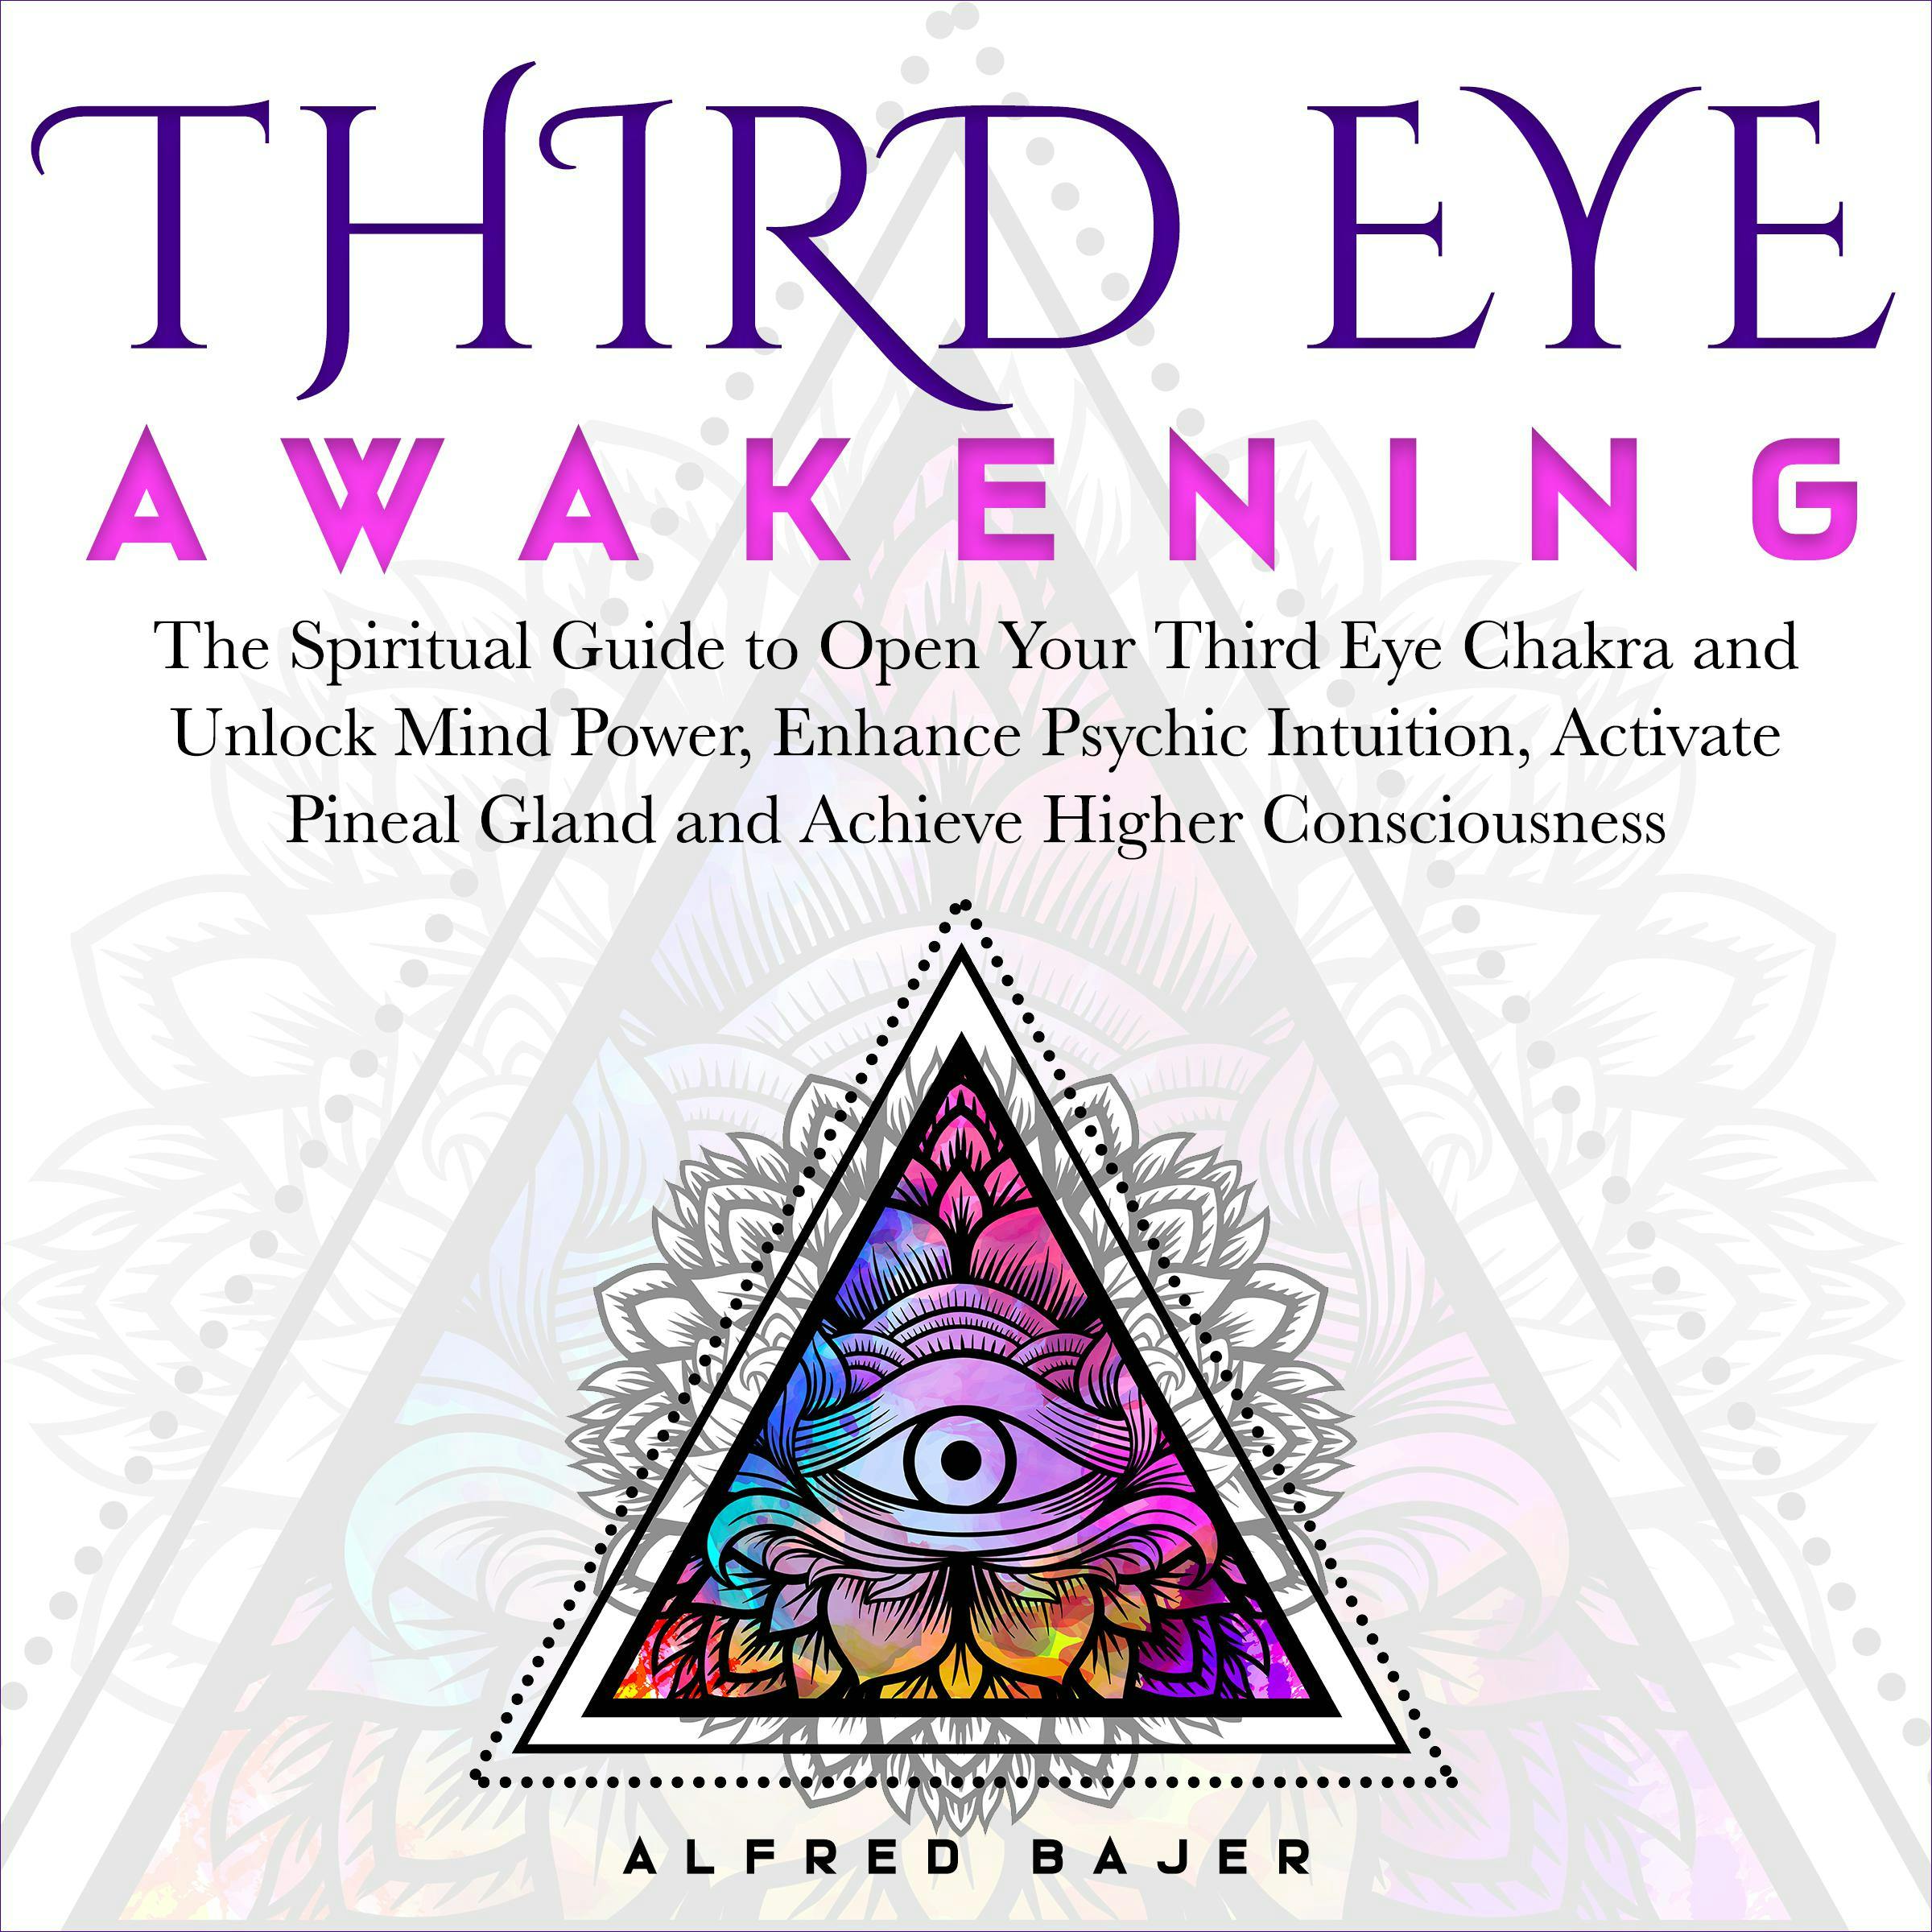 Third Eye Awakening: The Spiritual Guide to Open Your Third Eye Chakra and Unlock Mind Power, Enhance Psychic Intuition, Activate Pineal Gland and Achieve Higher Consciousness - Alfred Bajer